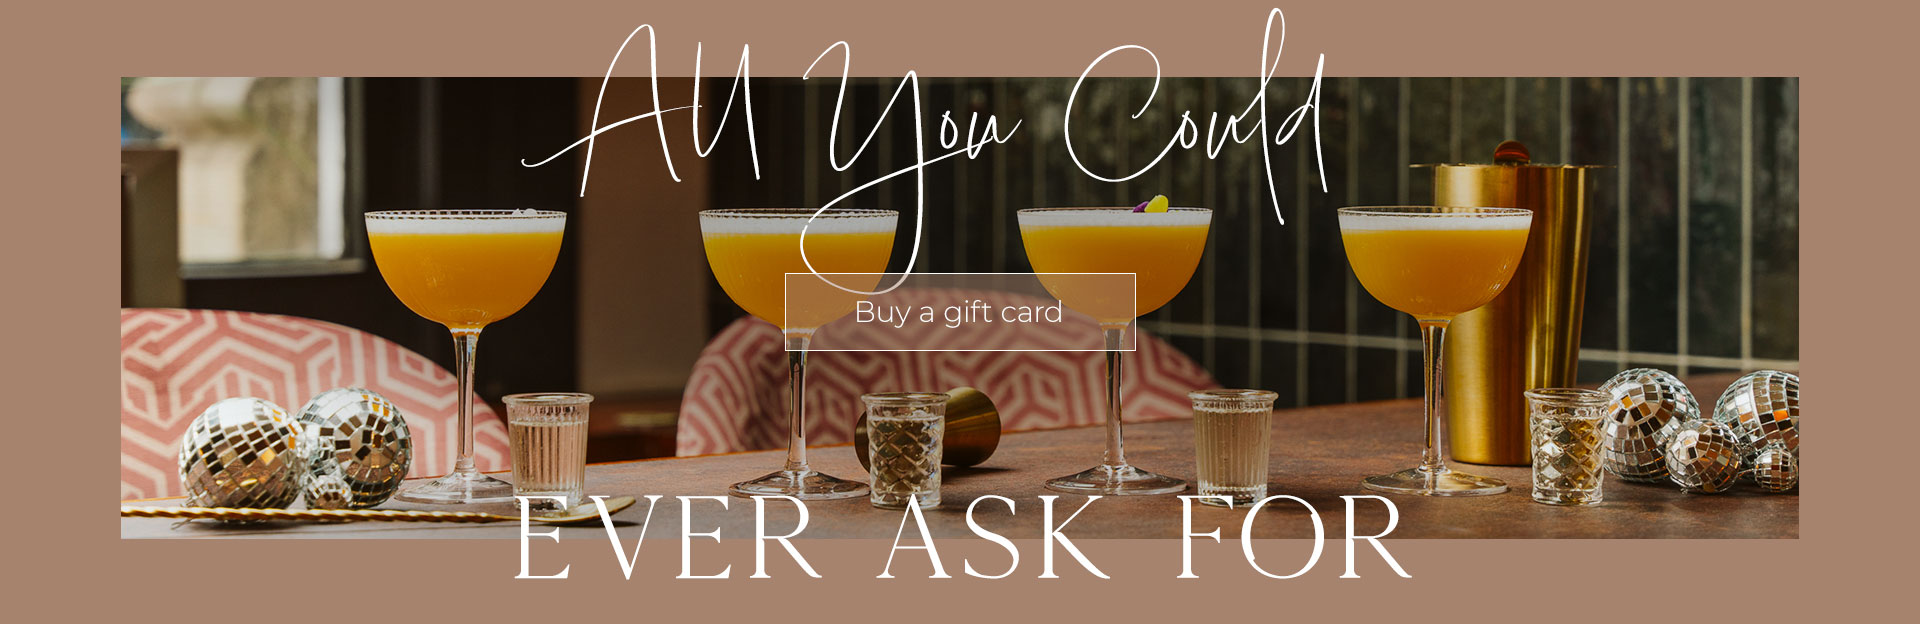 All Bar One Gift Cards at All Bar One Aberdeen